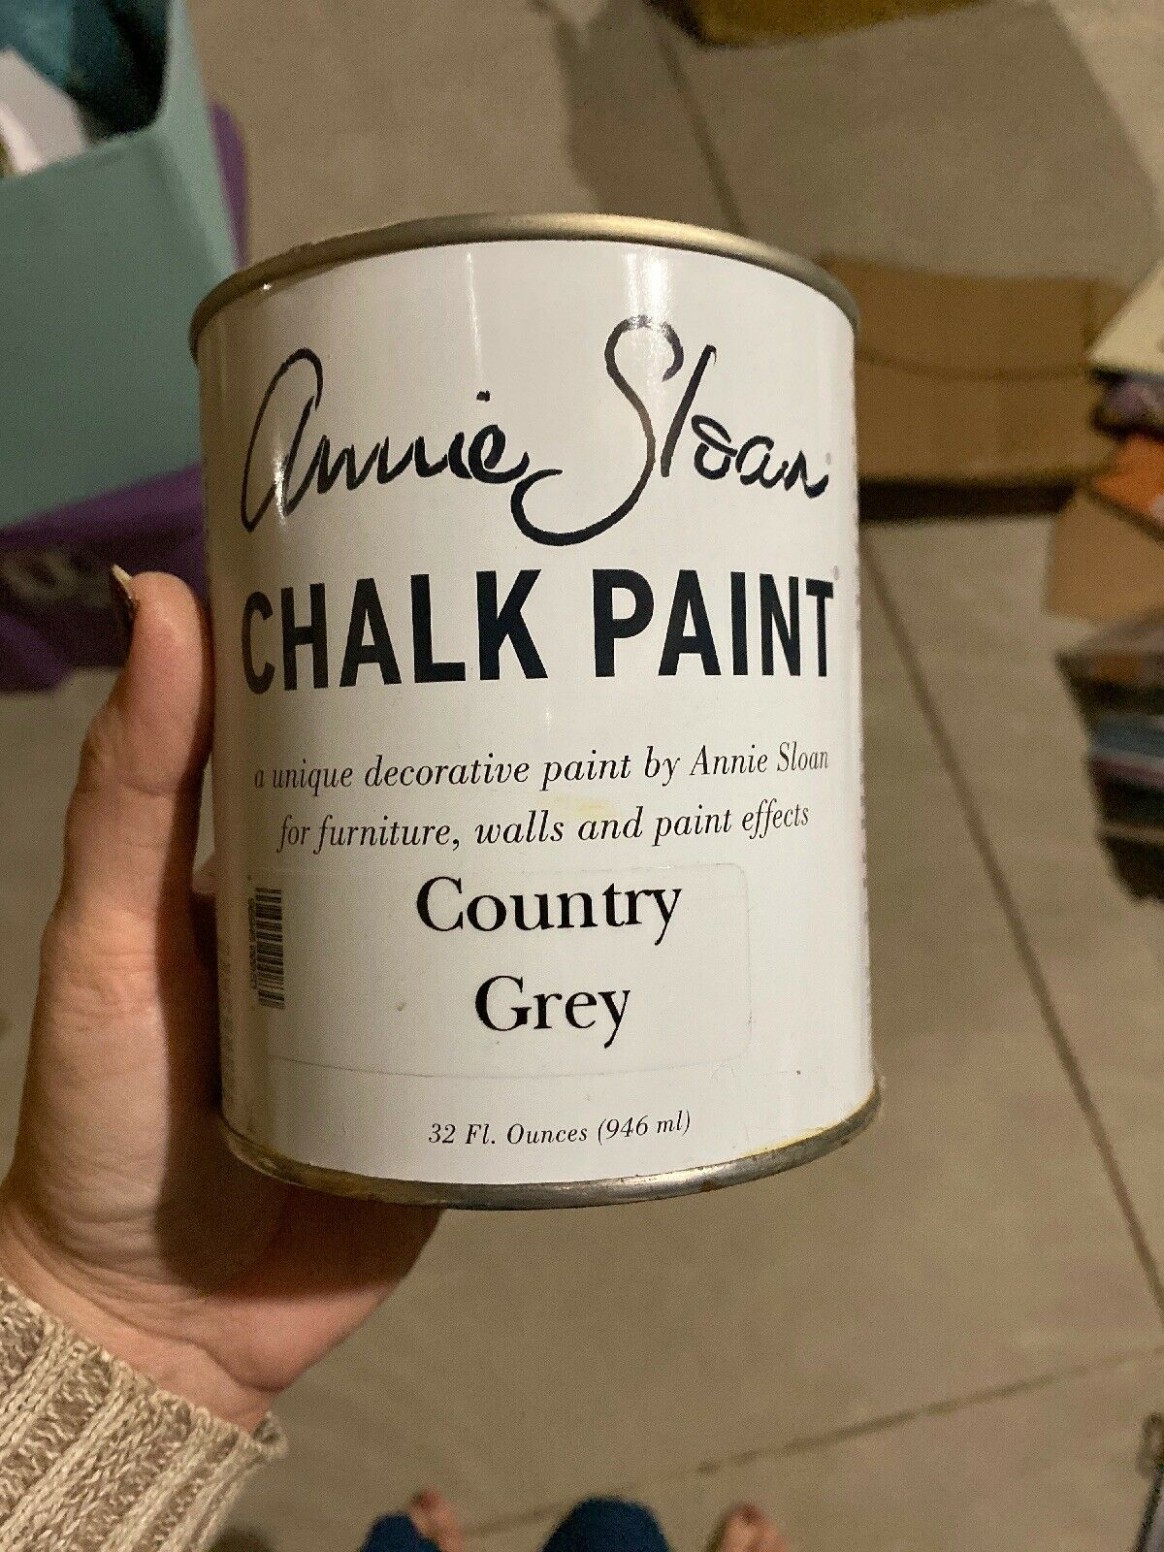 The Original Quart Annie Sloan Chalk Paint “country Grey” Gray Opened And Tested Can You Buy Annie Sloan Chalk Paint At Lowes